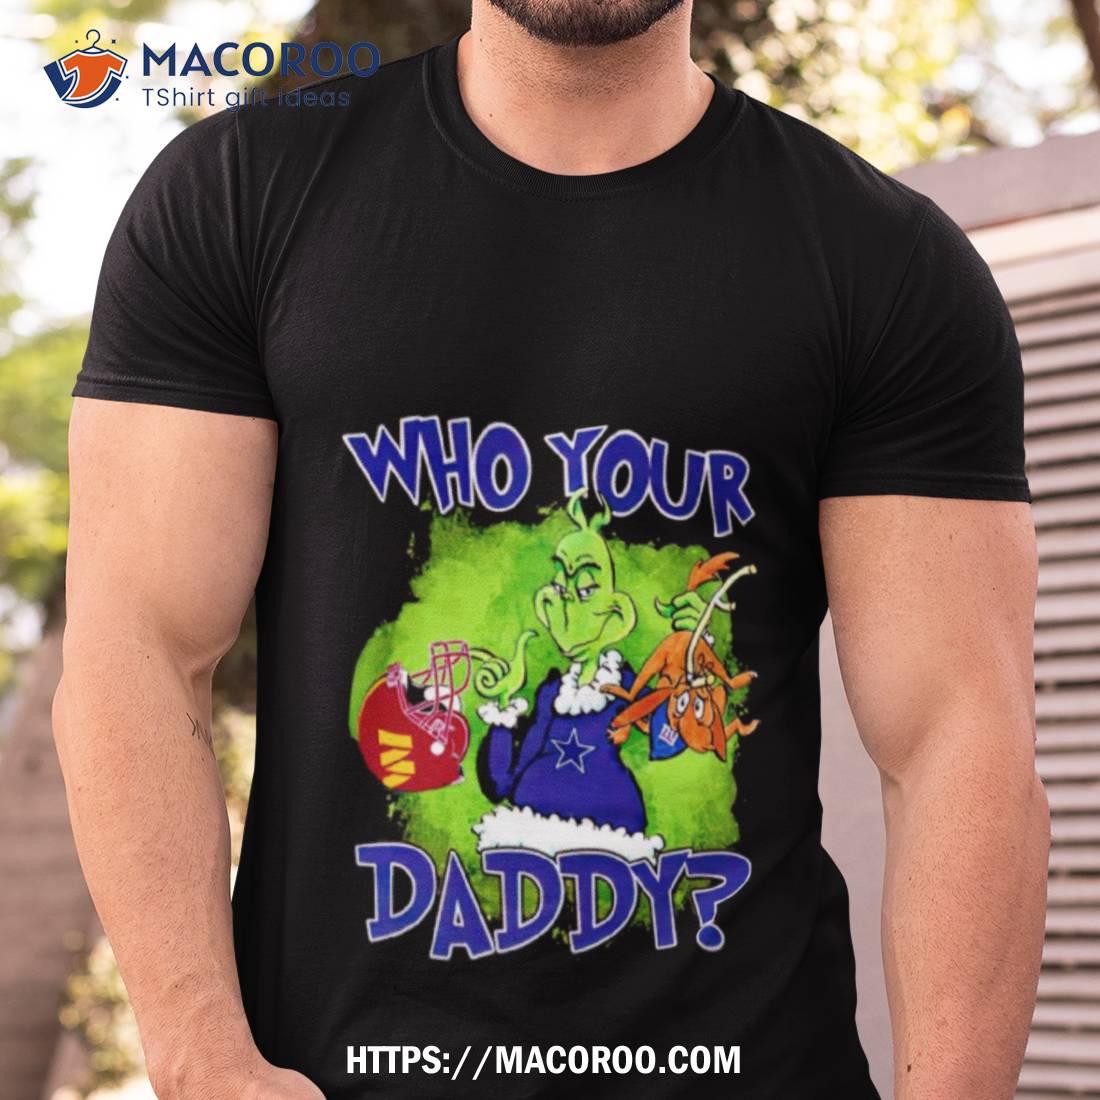 Whos Your Daddy T-Shirt